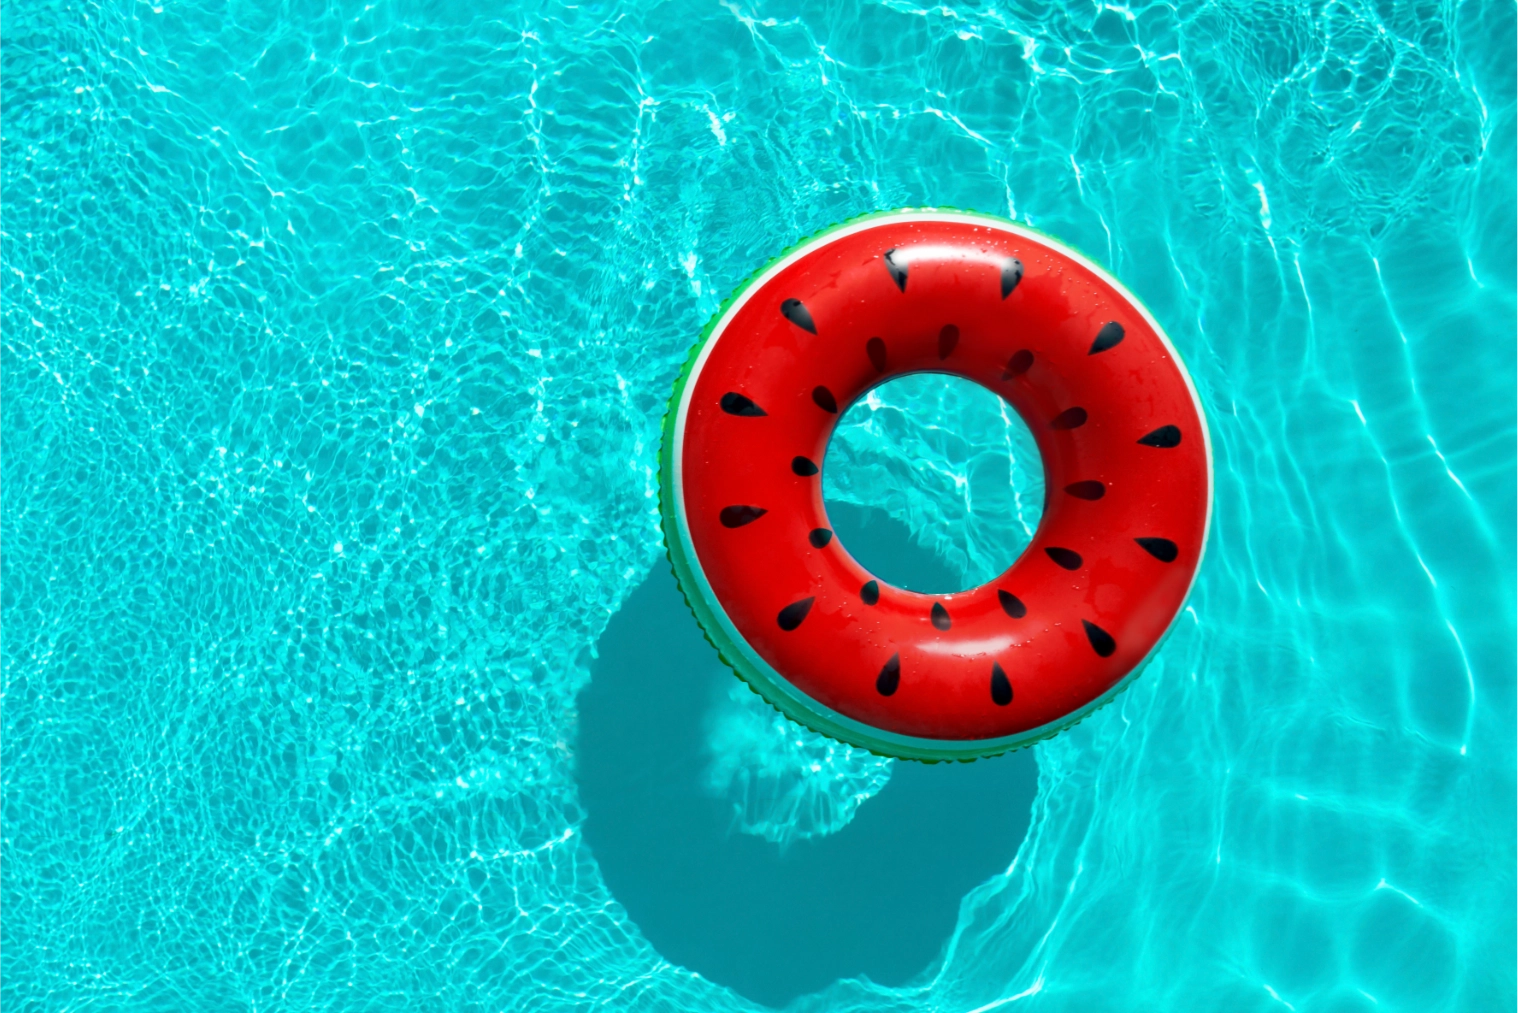 Pool float with watermelon design floating in water